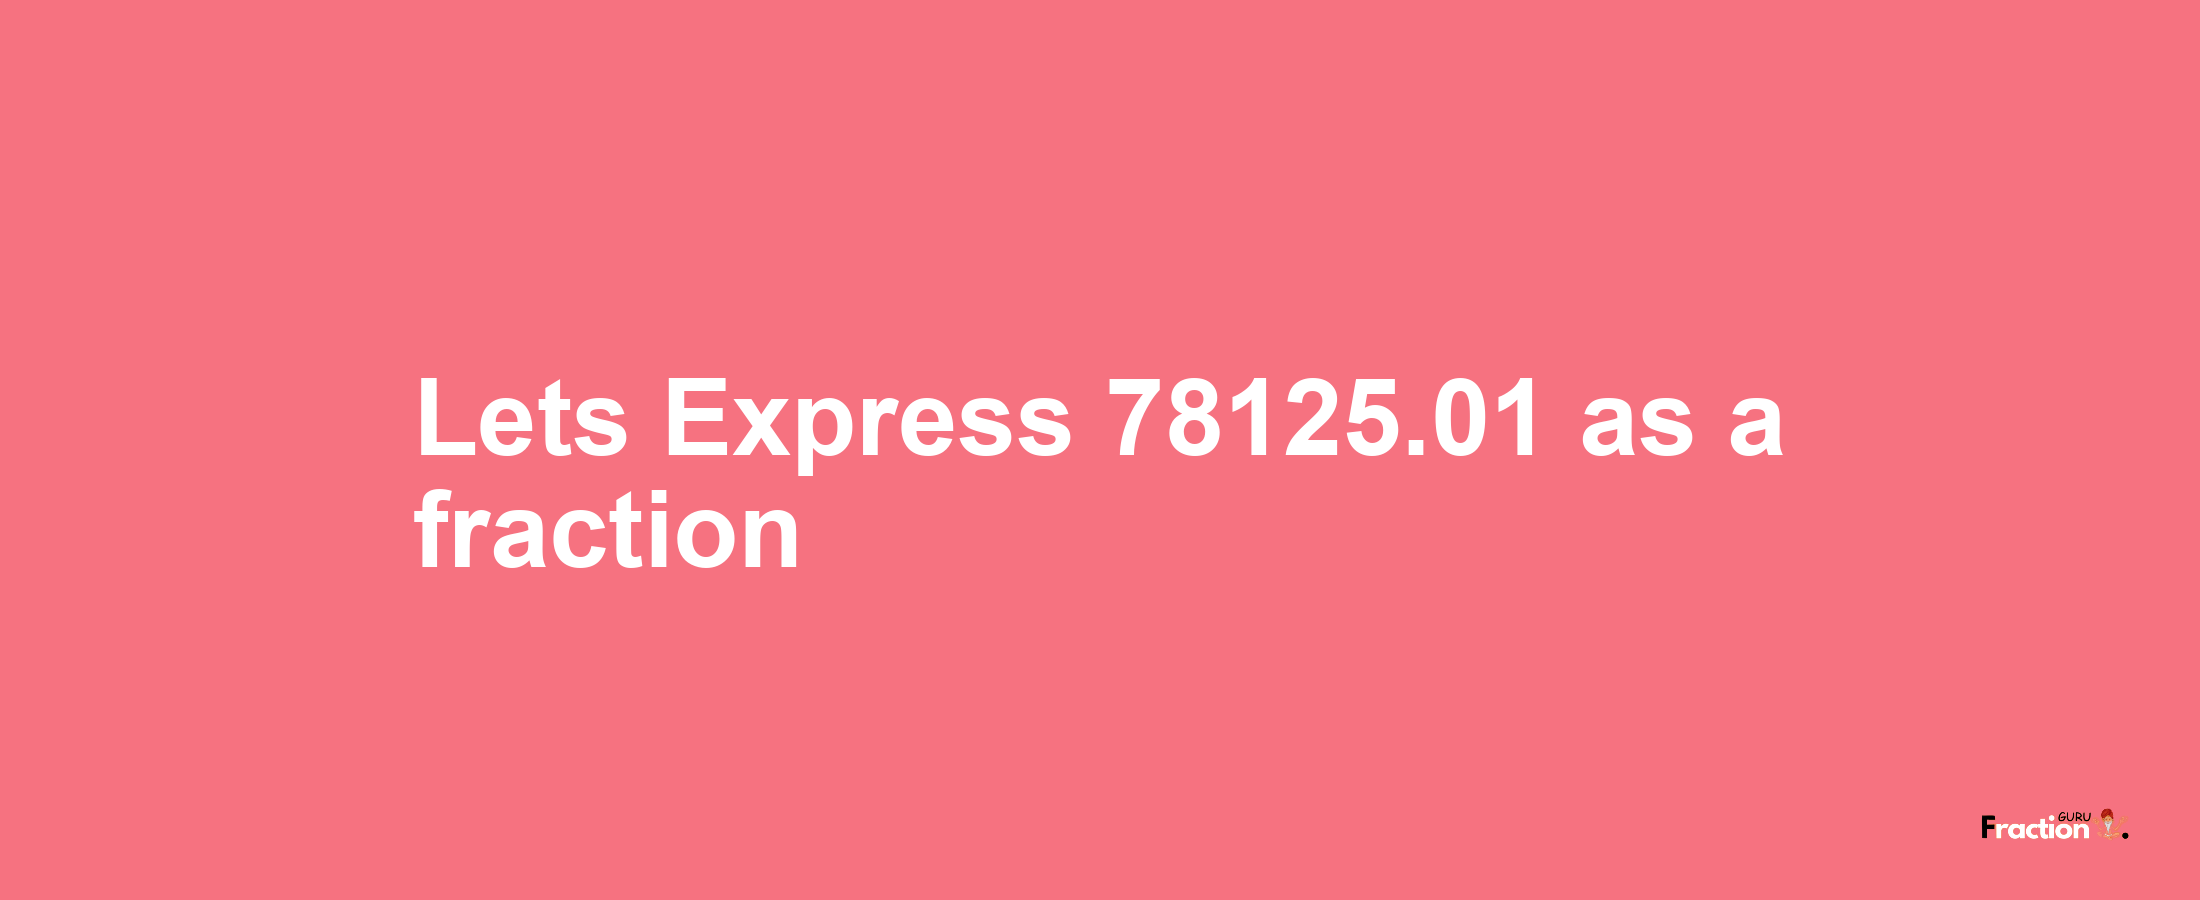 Lets Express 78125.01 as afraction